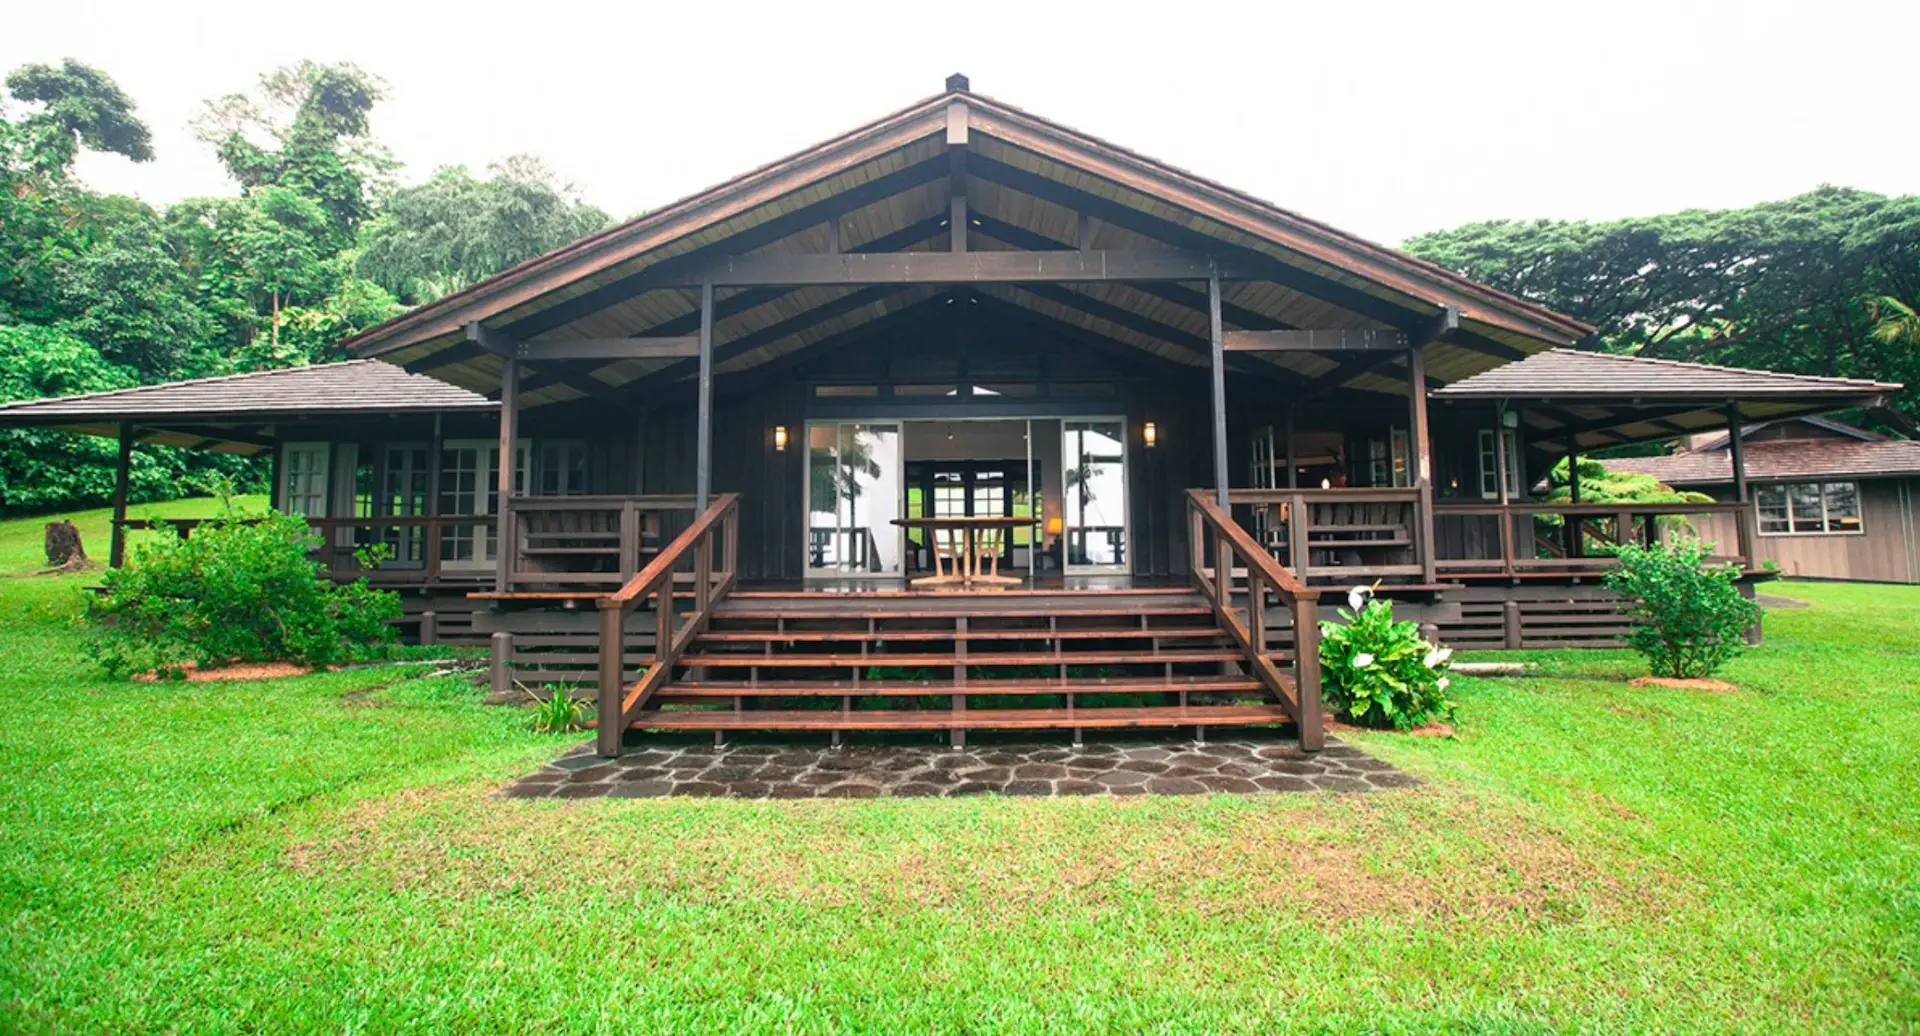 A cabin-style house with a large front porch, wooden steps leading up to the entrance, and a lush green lawn. The structure features a high triangular roof and large windows, much like the serene retreat options you'd find at the best group hotels in Maui, nestled in a tropical forested area.